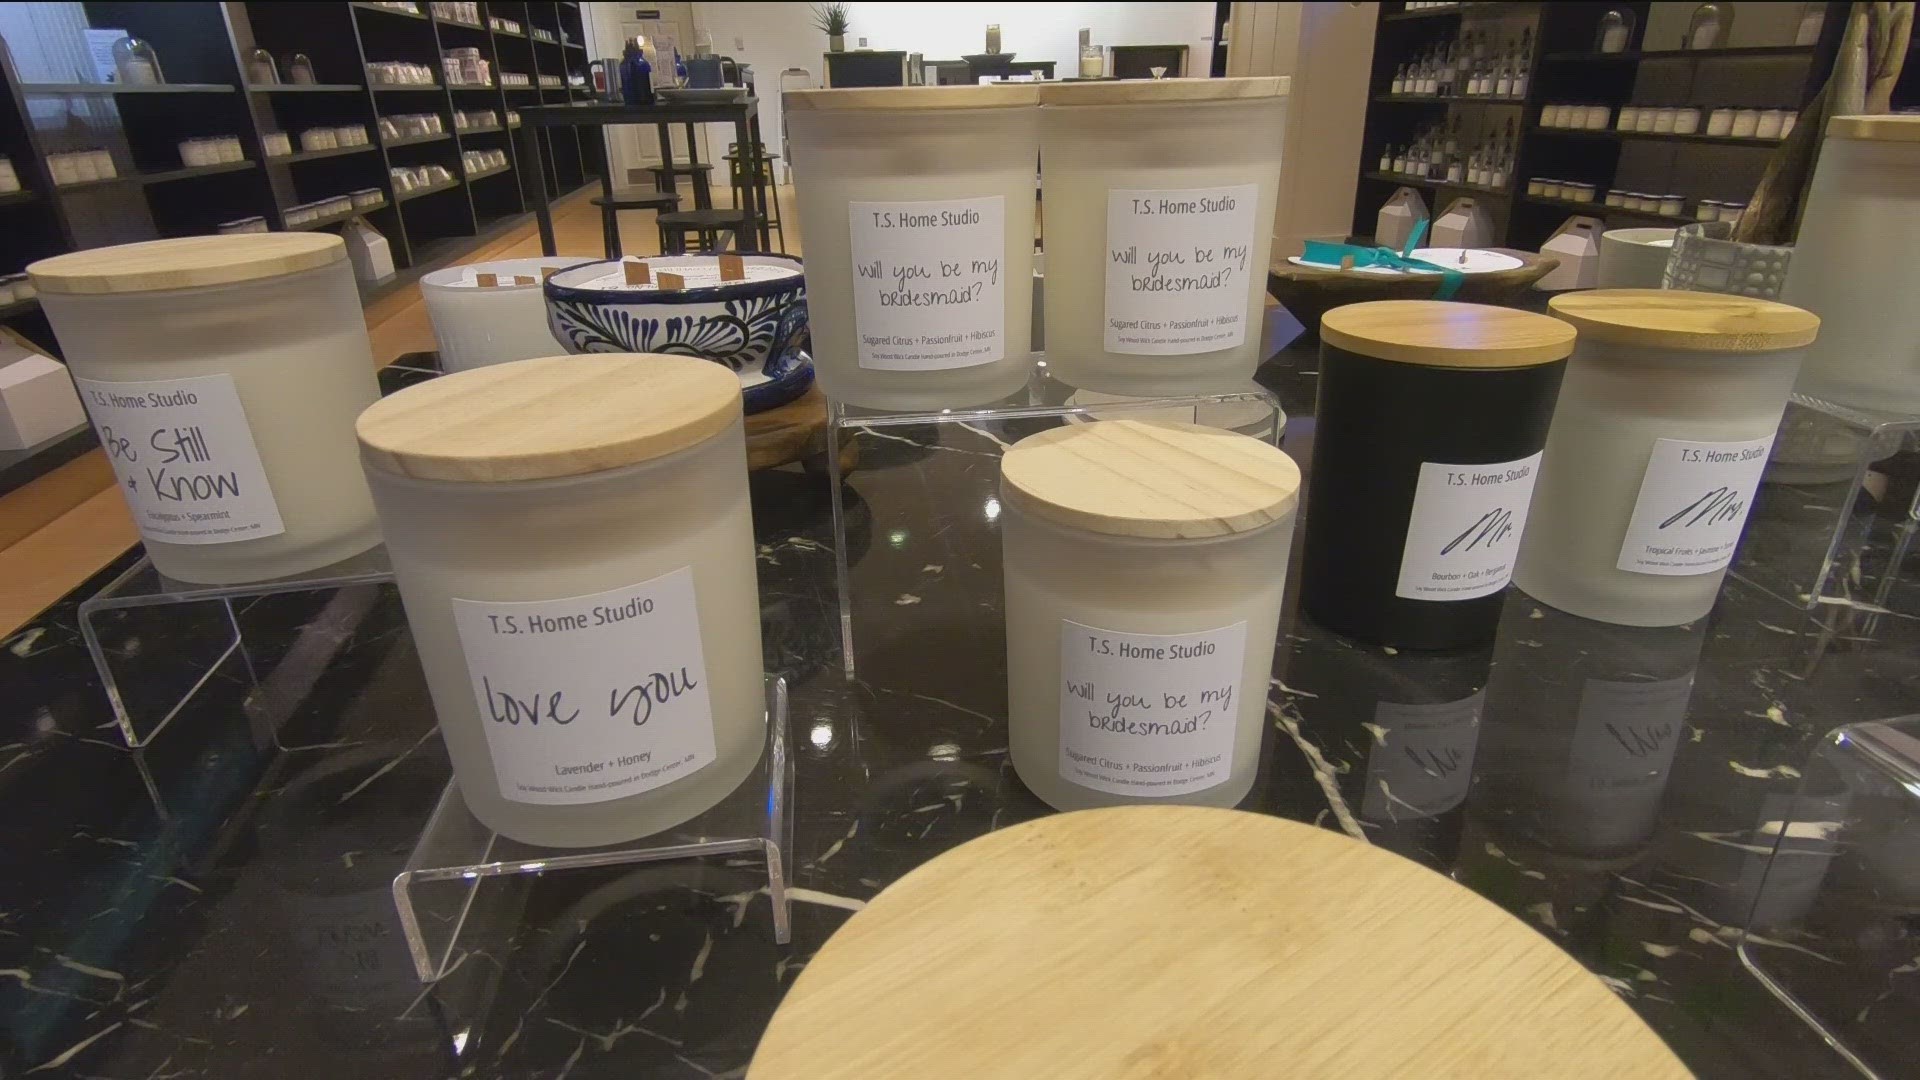 Get crafting! KARE 11 Saturday shows you how to make candles for your home.